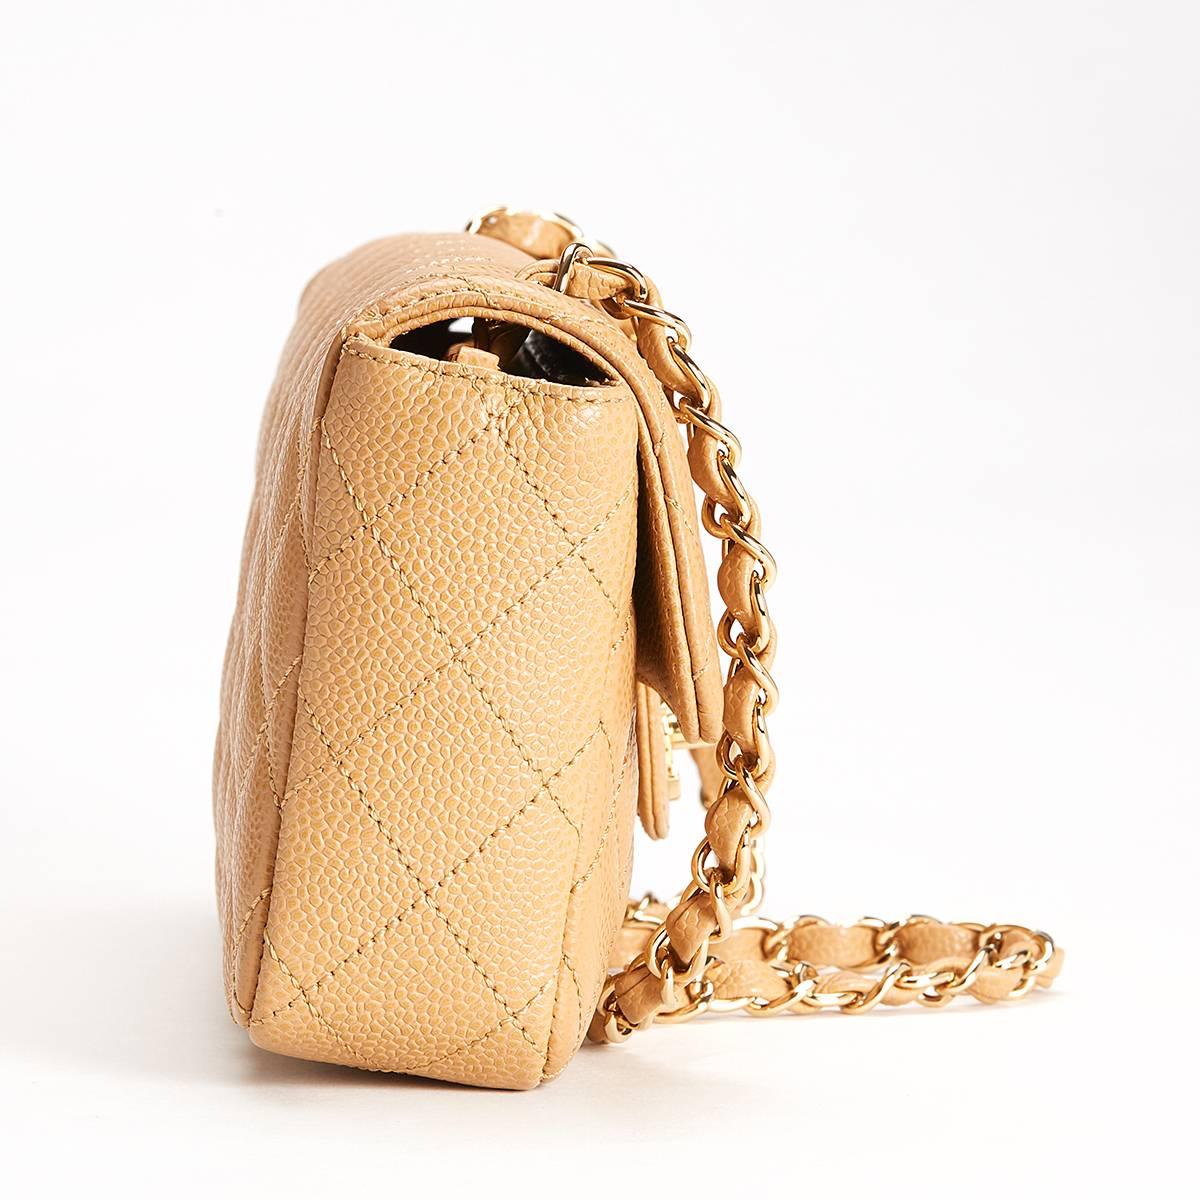 CHANEL TAN CAVIAR LEATHER EAST WEST CLASSIC SINGLE FLAP BAG

This ladies Chanel Classic Single Flap Bag is primarily made from tan caviar leather complimented by gold hardware. This bag is in accompanied by Chanel box, dust bag & authenticity